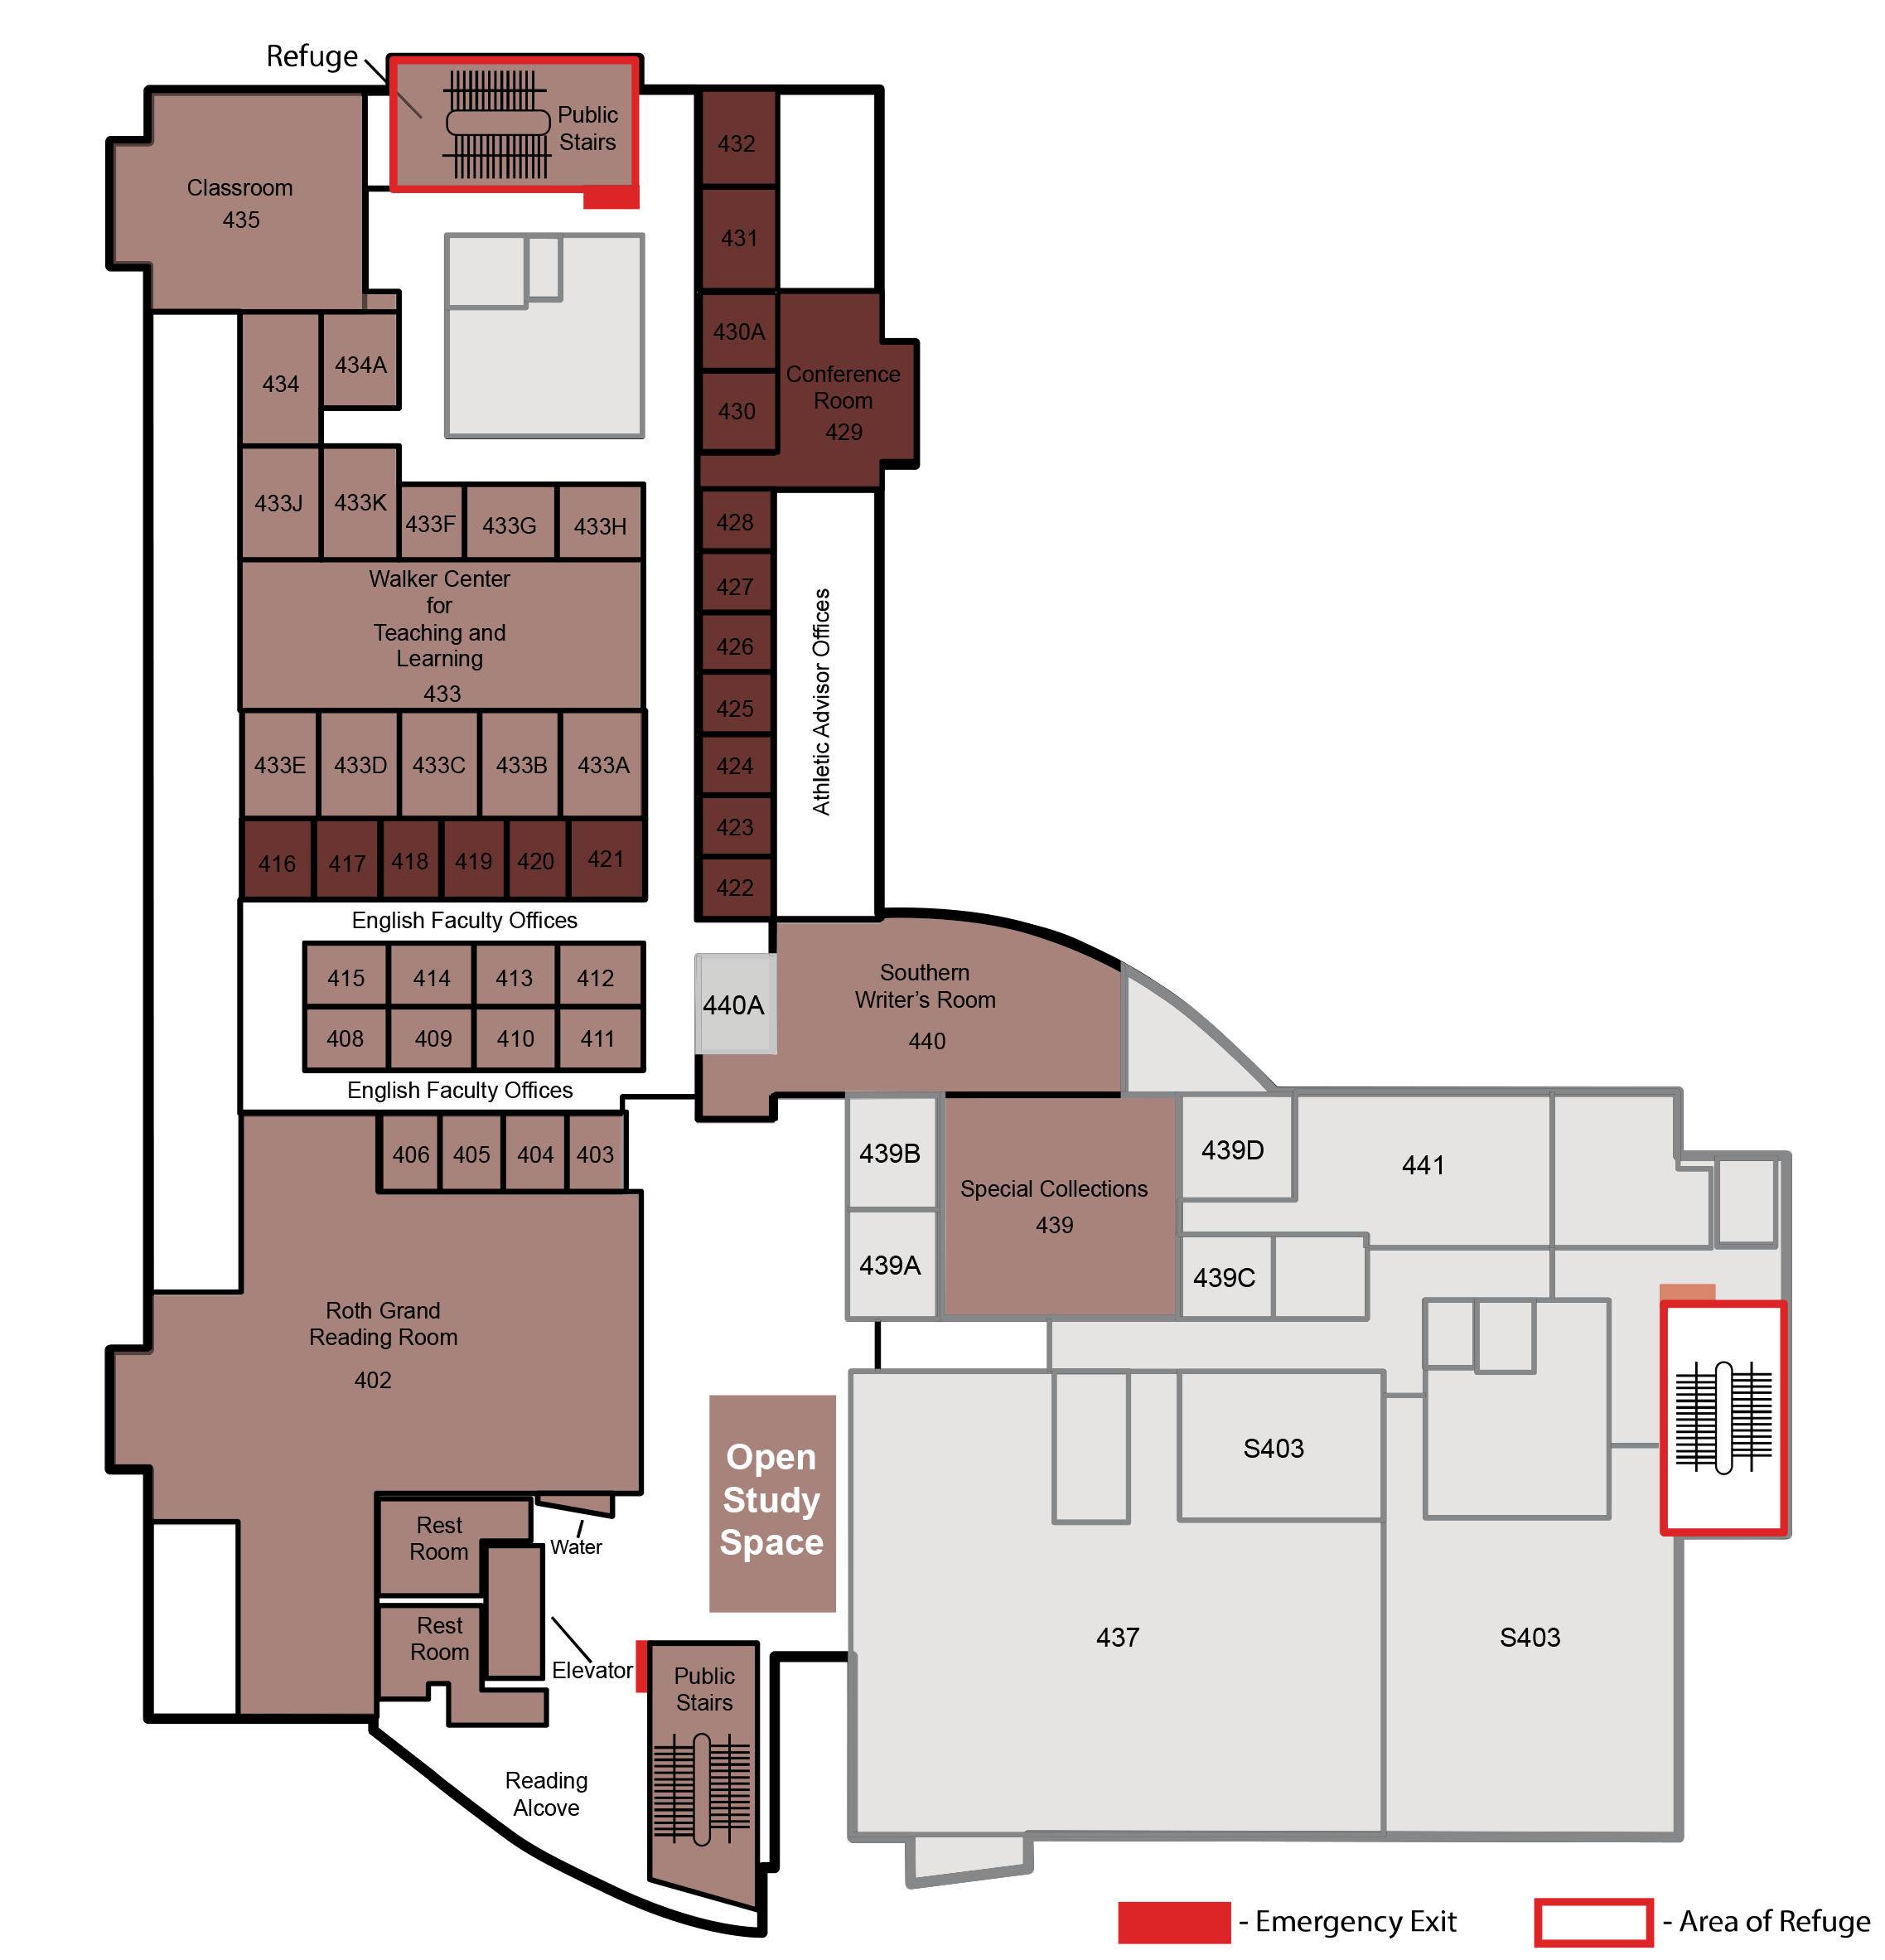 A map of the fourth floor of the library